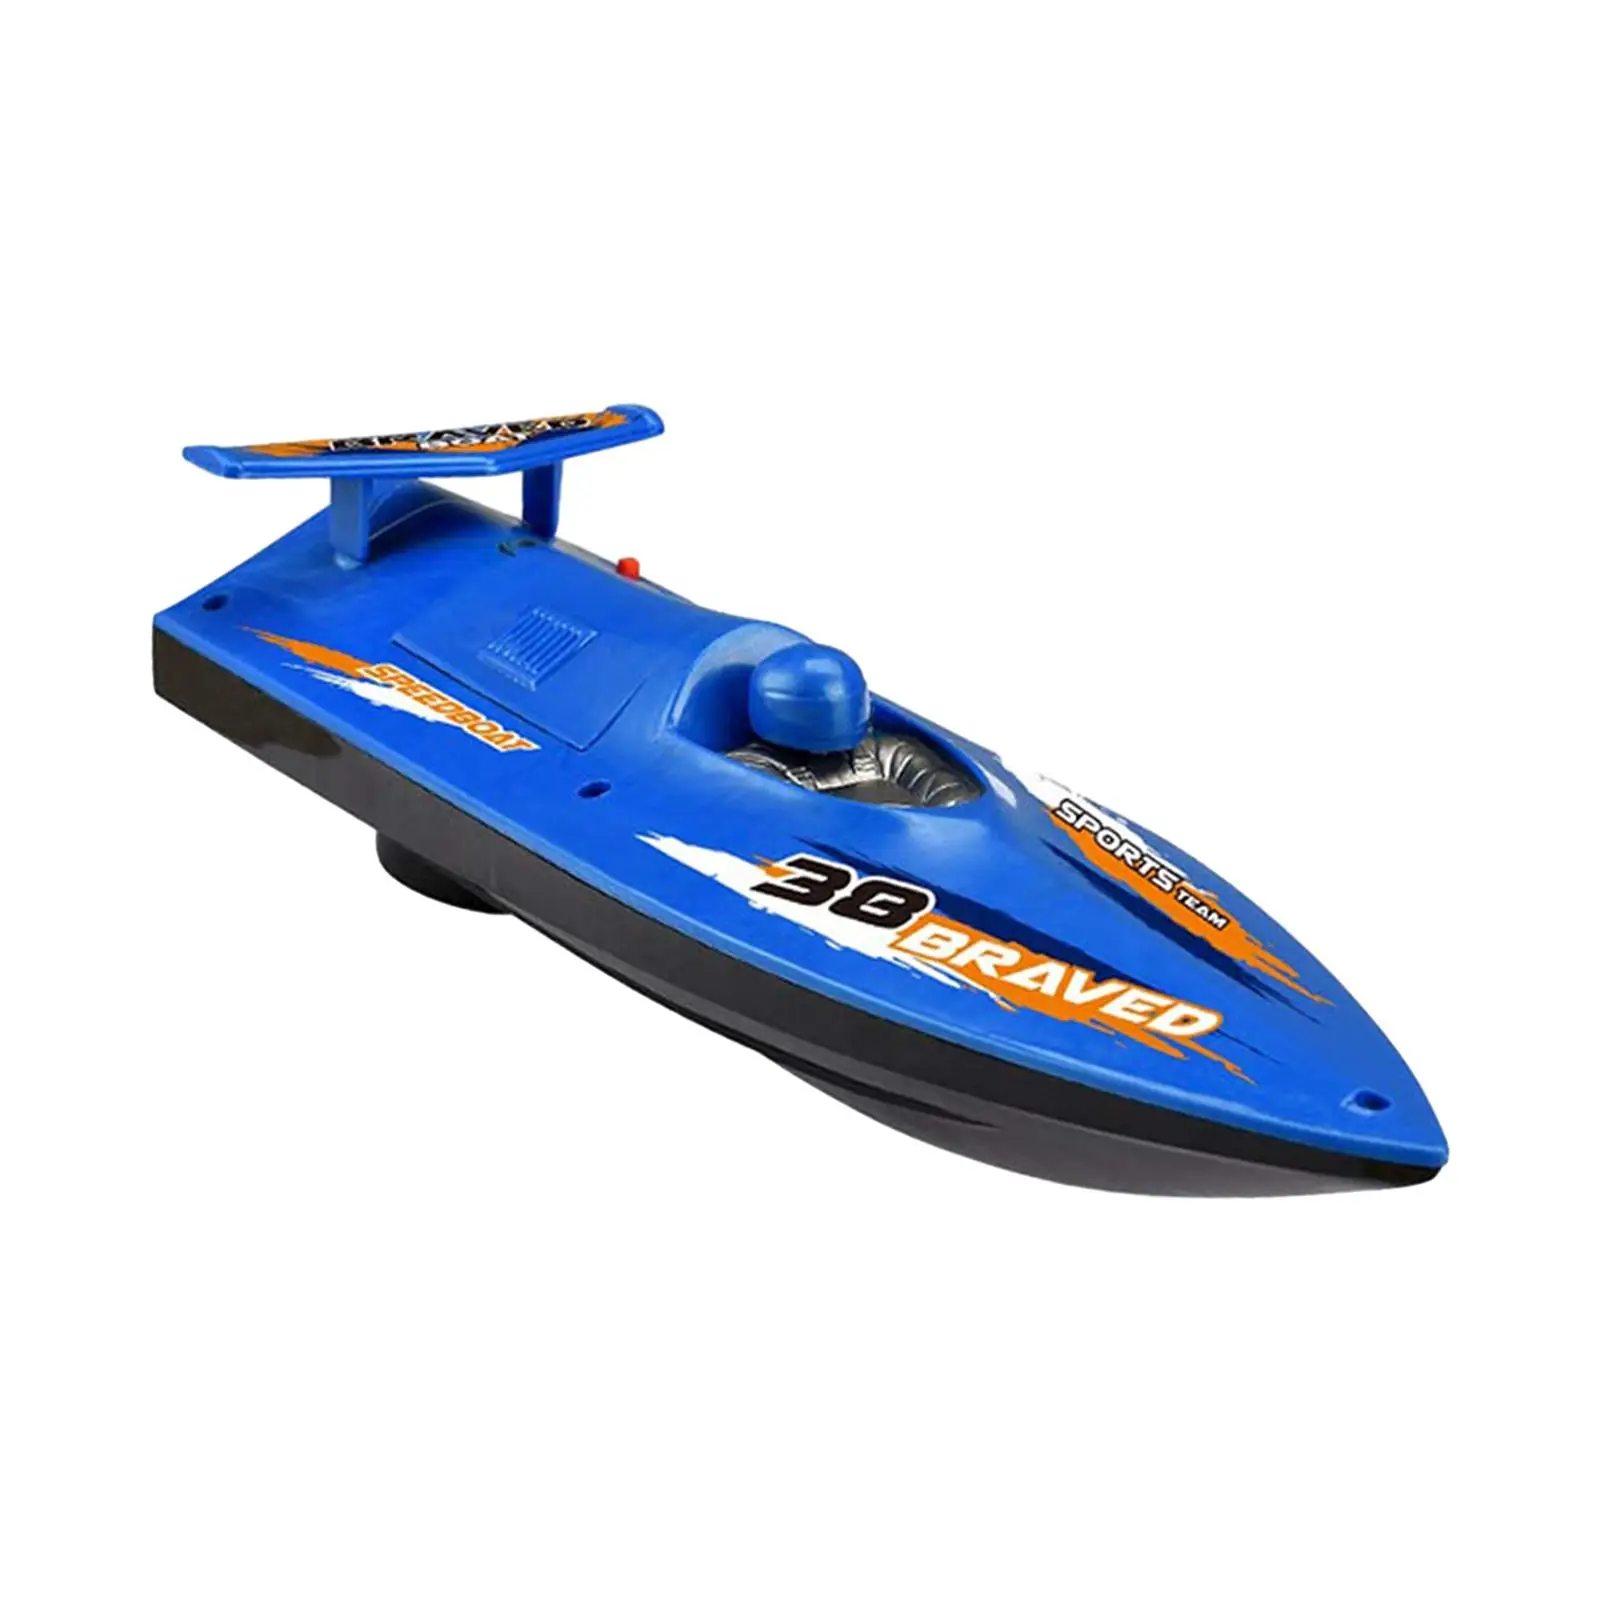 Electric Speed Boat Toy Birthday Gift Water Toy Motorboat Speed Boat Bathtub Toy for Streams Bathtub Outdoor Infant Toddlers